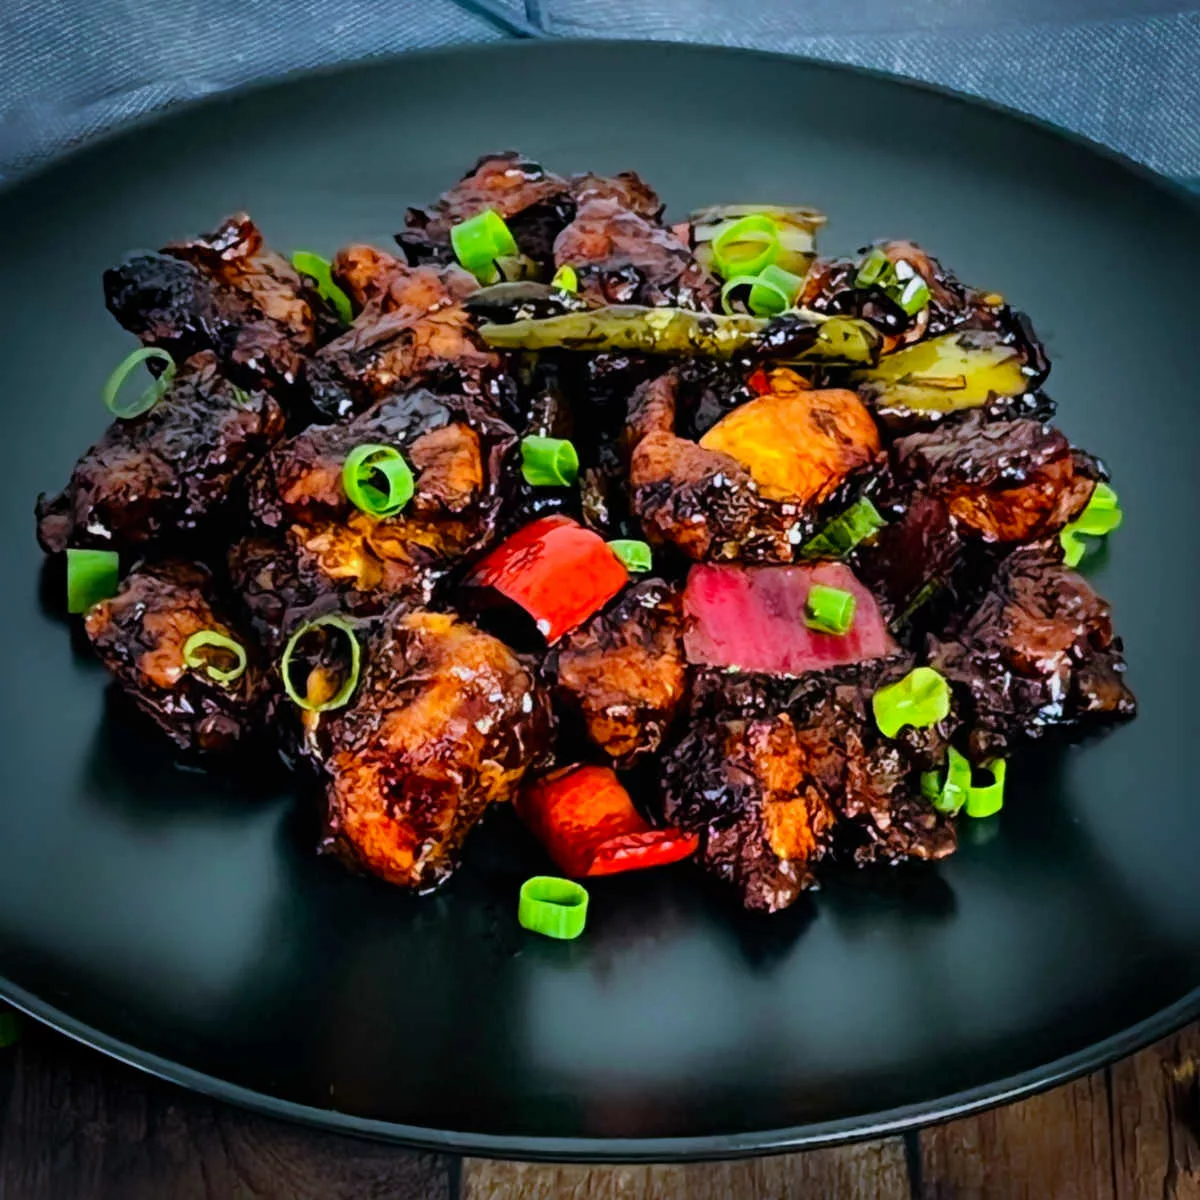 Indo-Chinese chili chicken placed on a black plate.